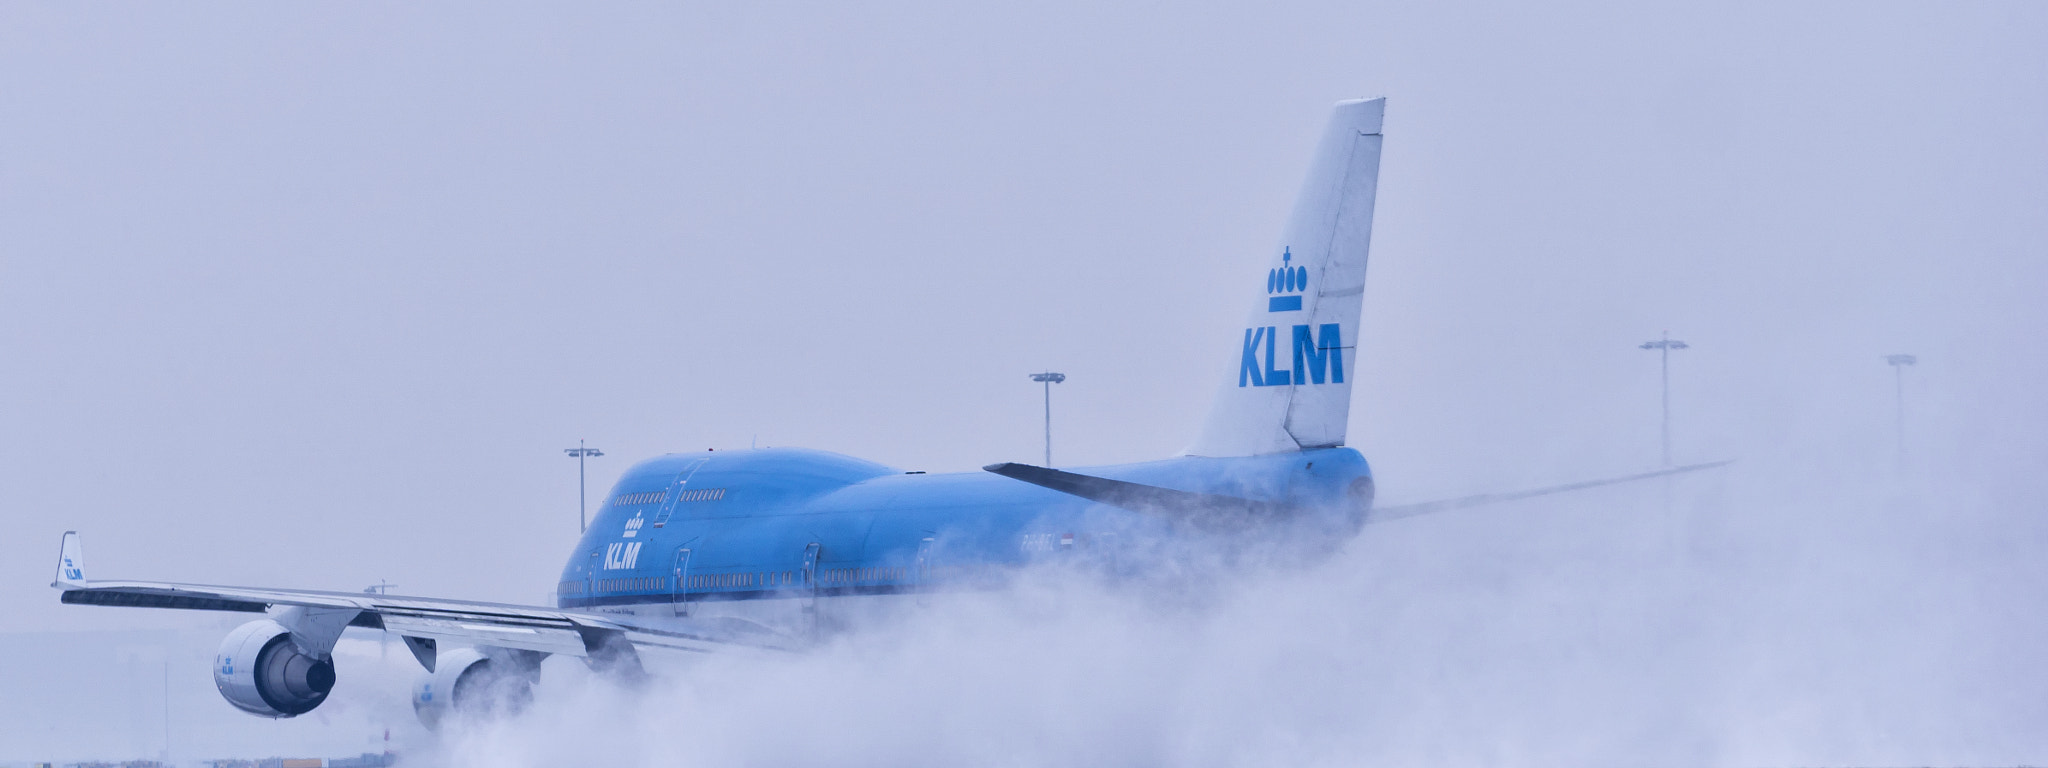 Sony a6000 sample photo. Ph bfl klm royal dutch airlines boeing cn photography